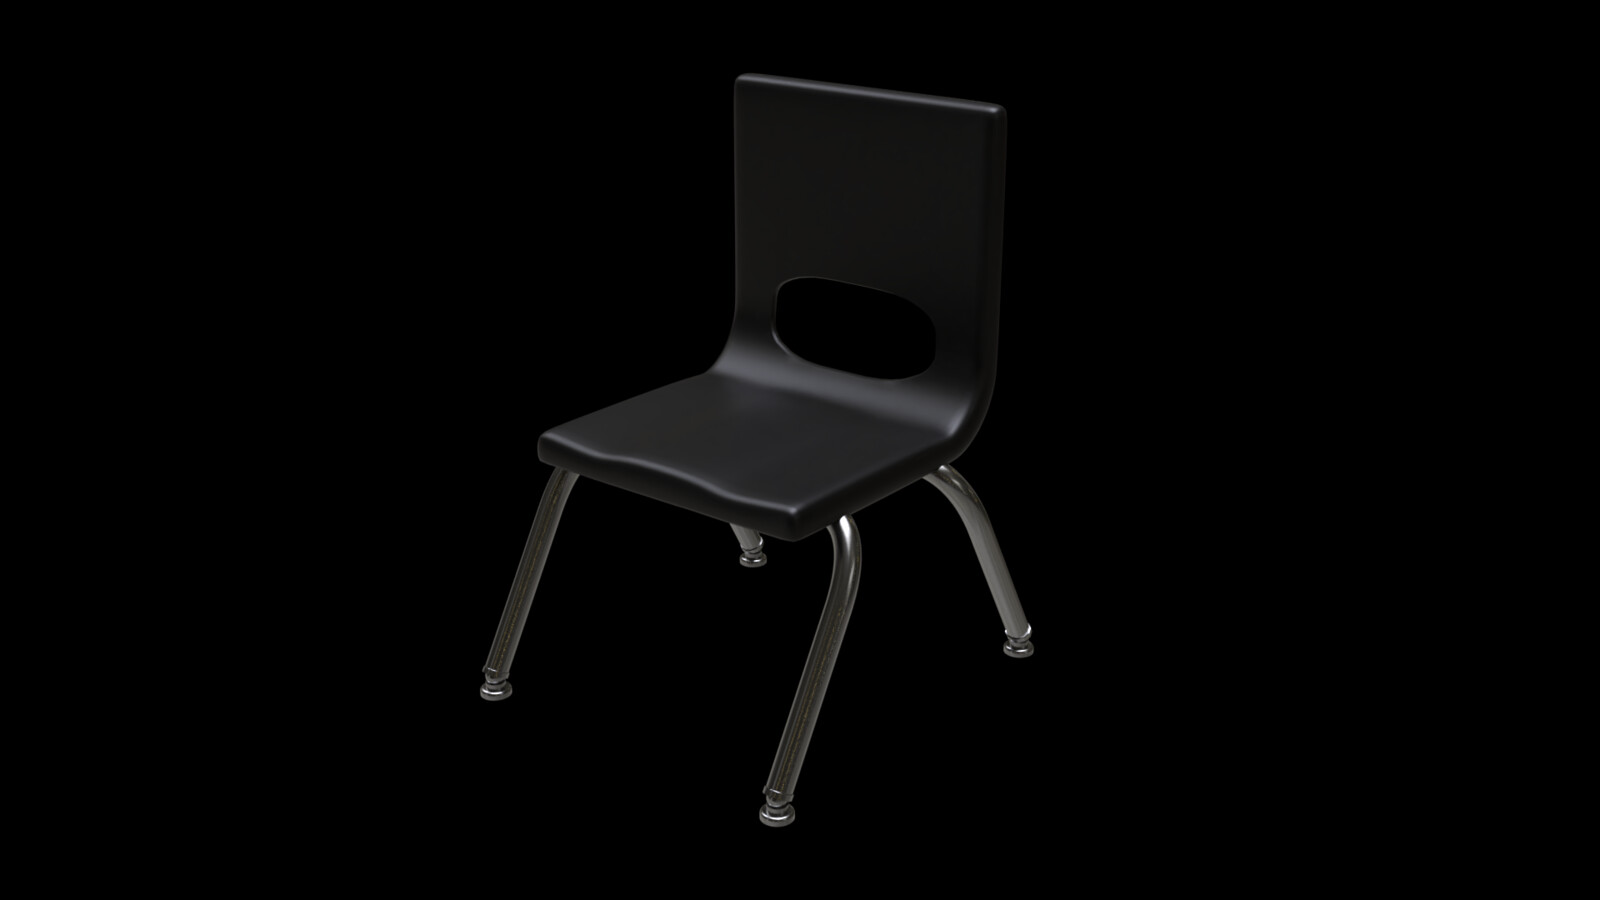 Student chair 3 render 1